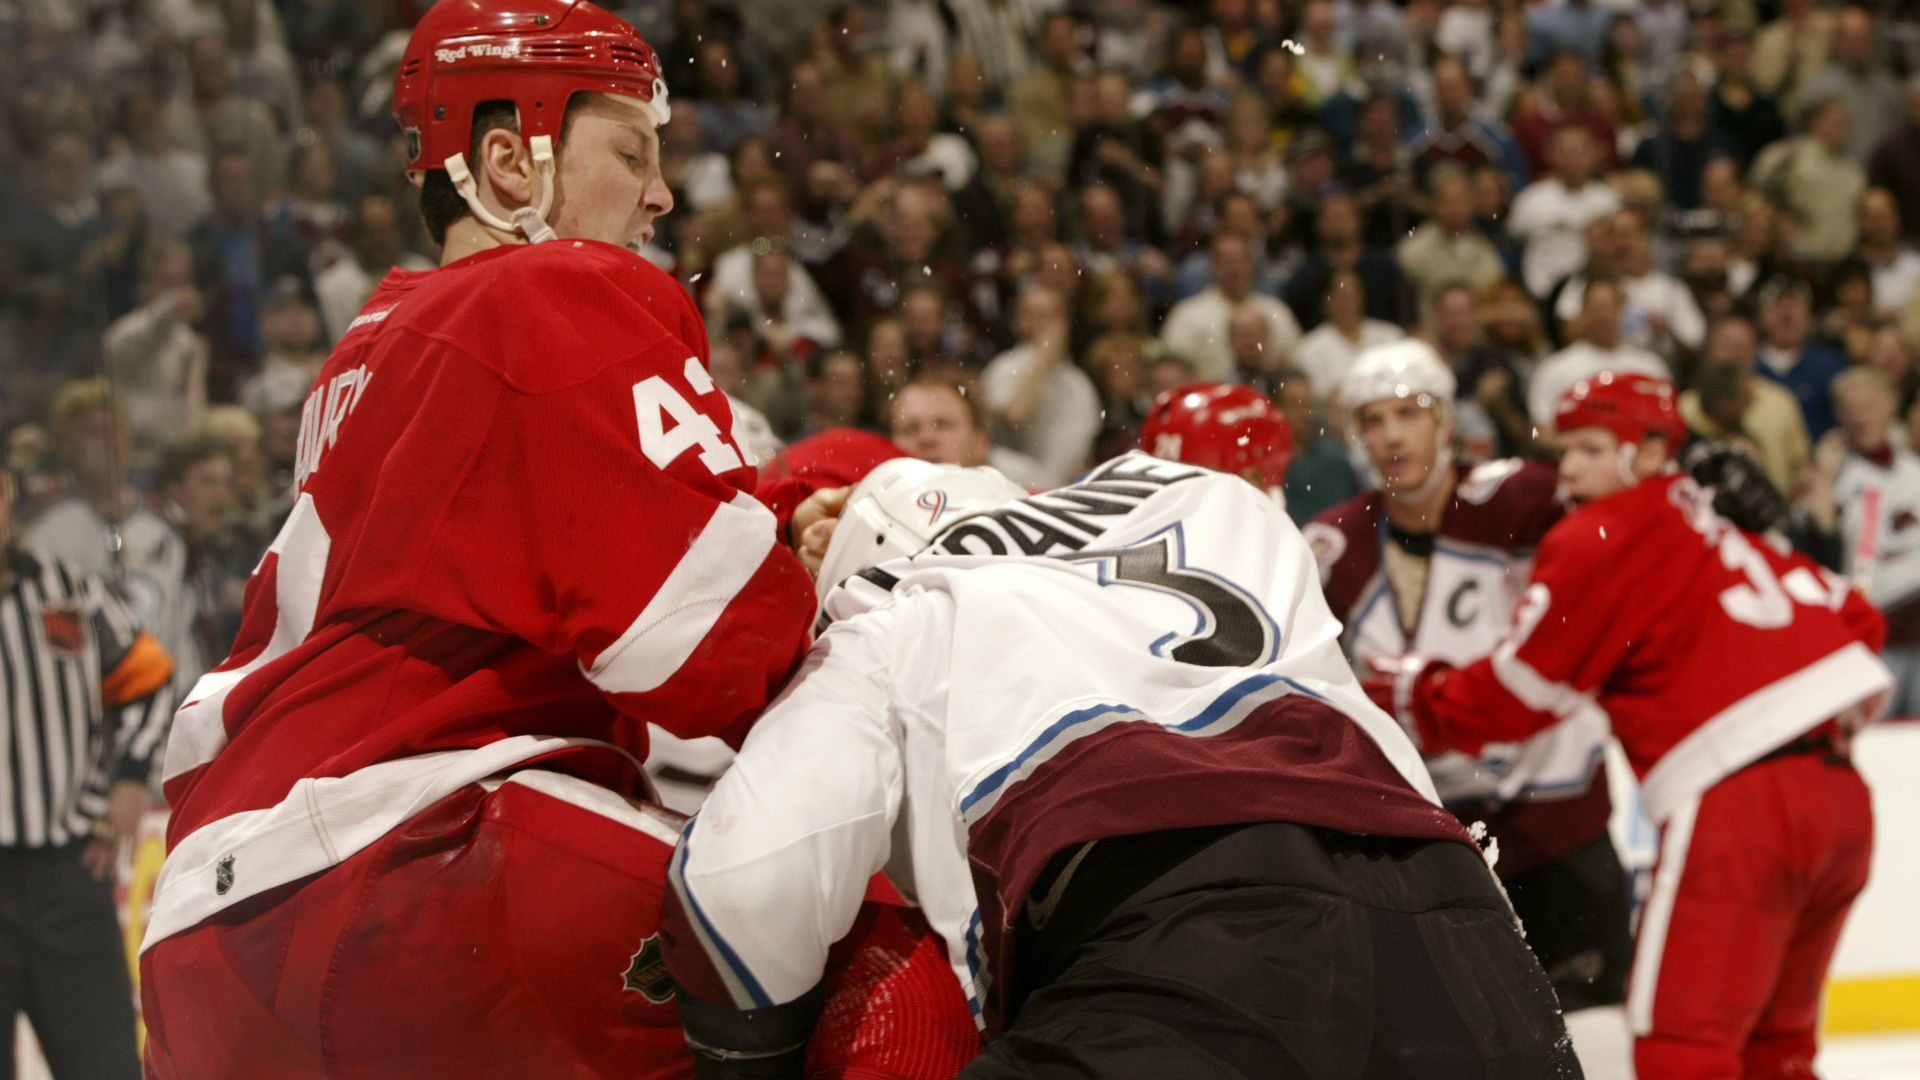 Sean Avery #42 of the Detroit Red Wings fights Pascal Trepanier #3 of the Colorado Avalanche in 2002